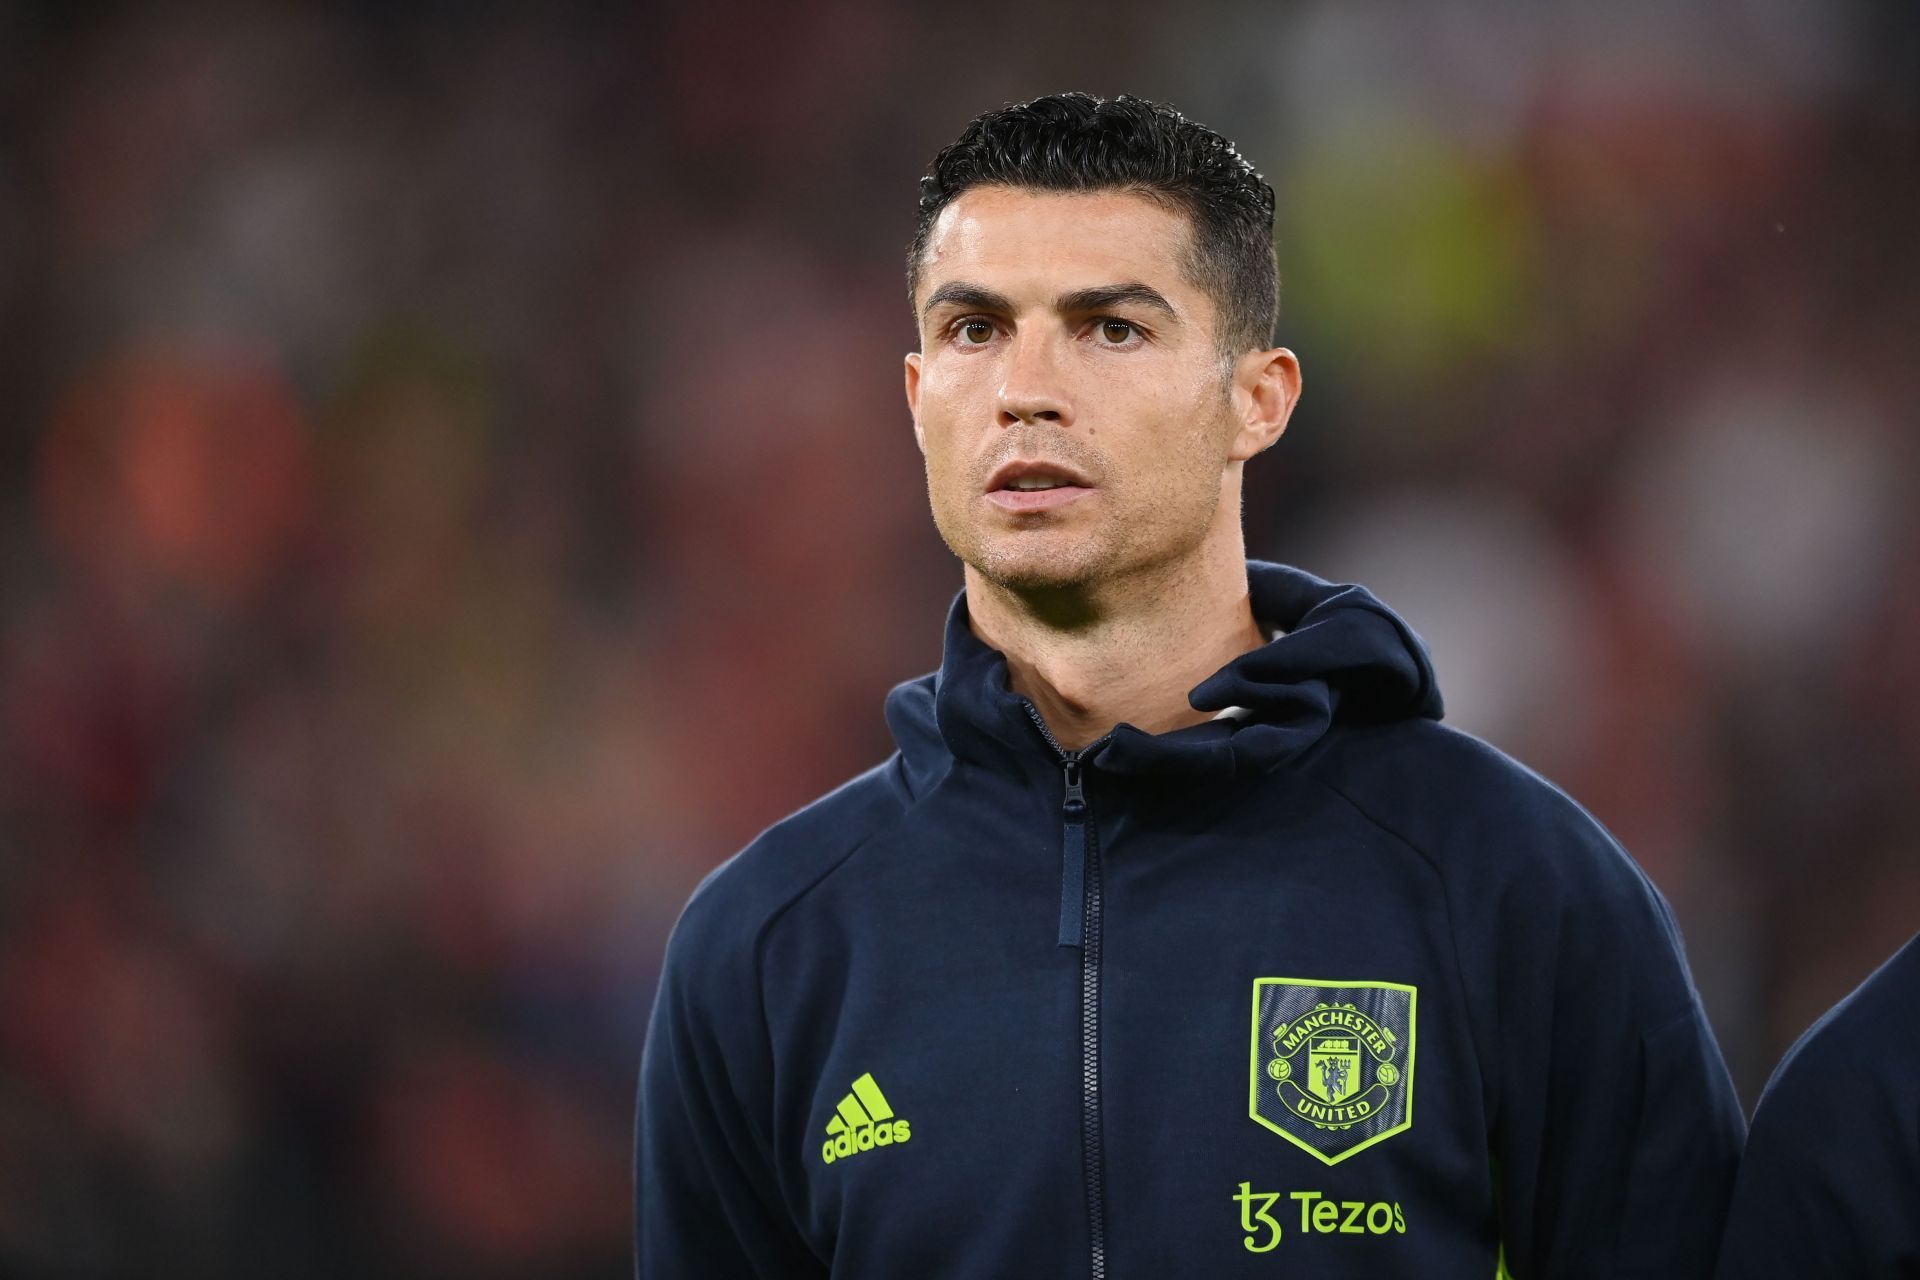 Cristiano Ronaldo has failed to cement a place in the starting XI at Old Trafford this season.